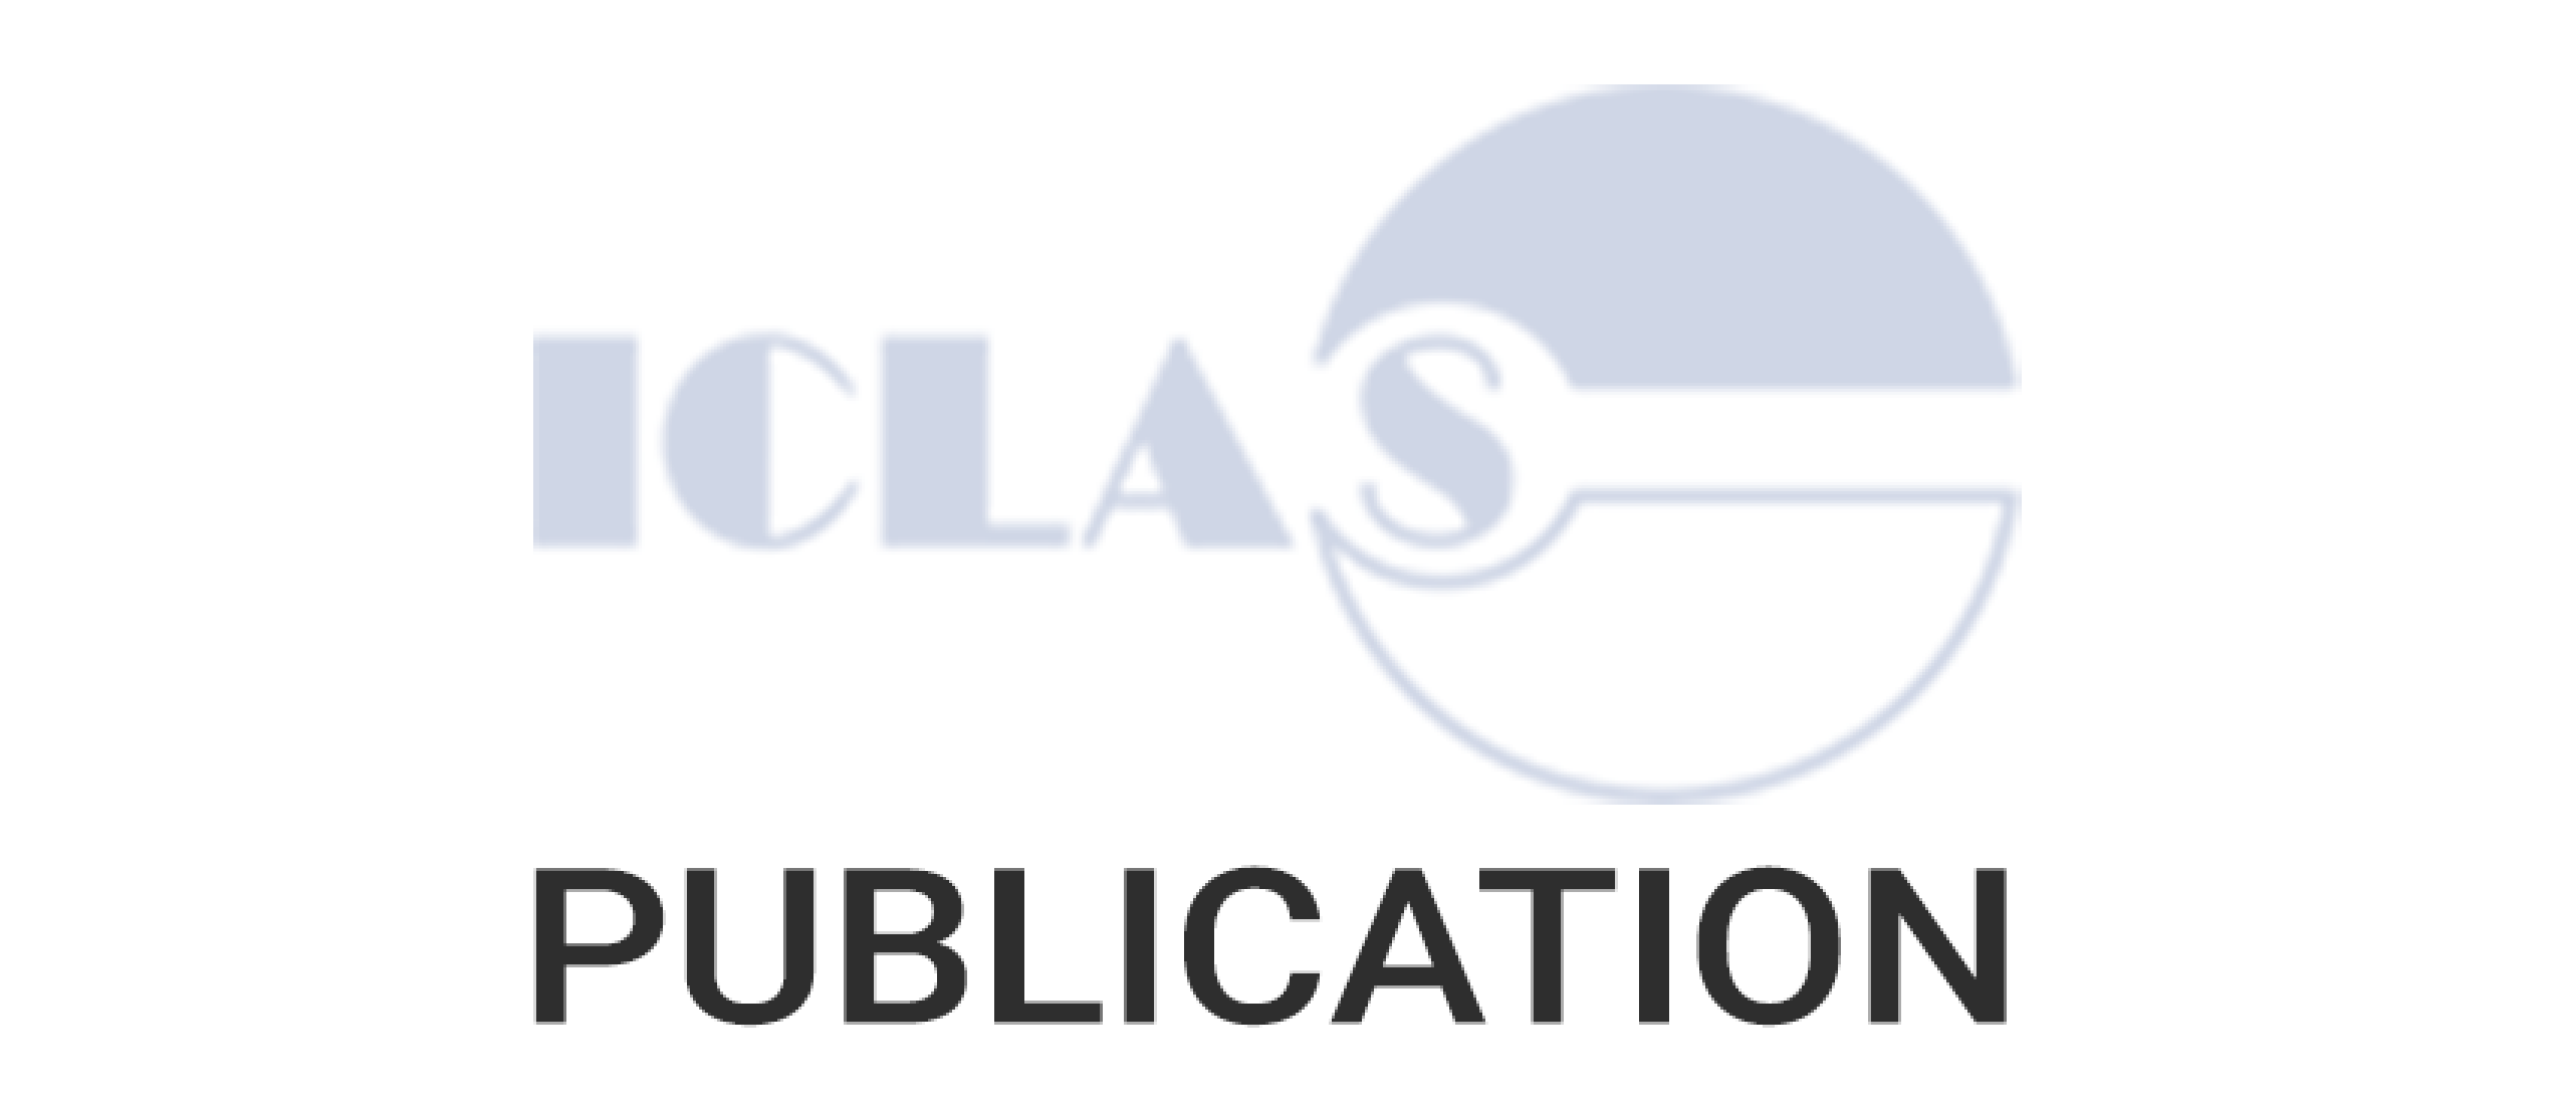 ICLAS working group on Harmonization：International guidance concerning the production care and use of genetically-altered animals